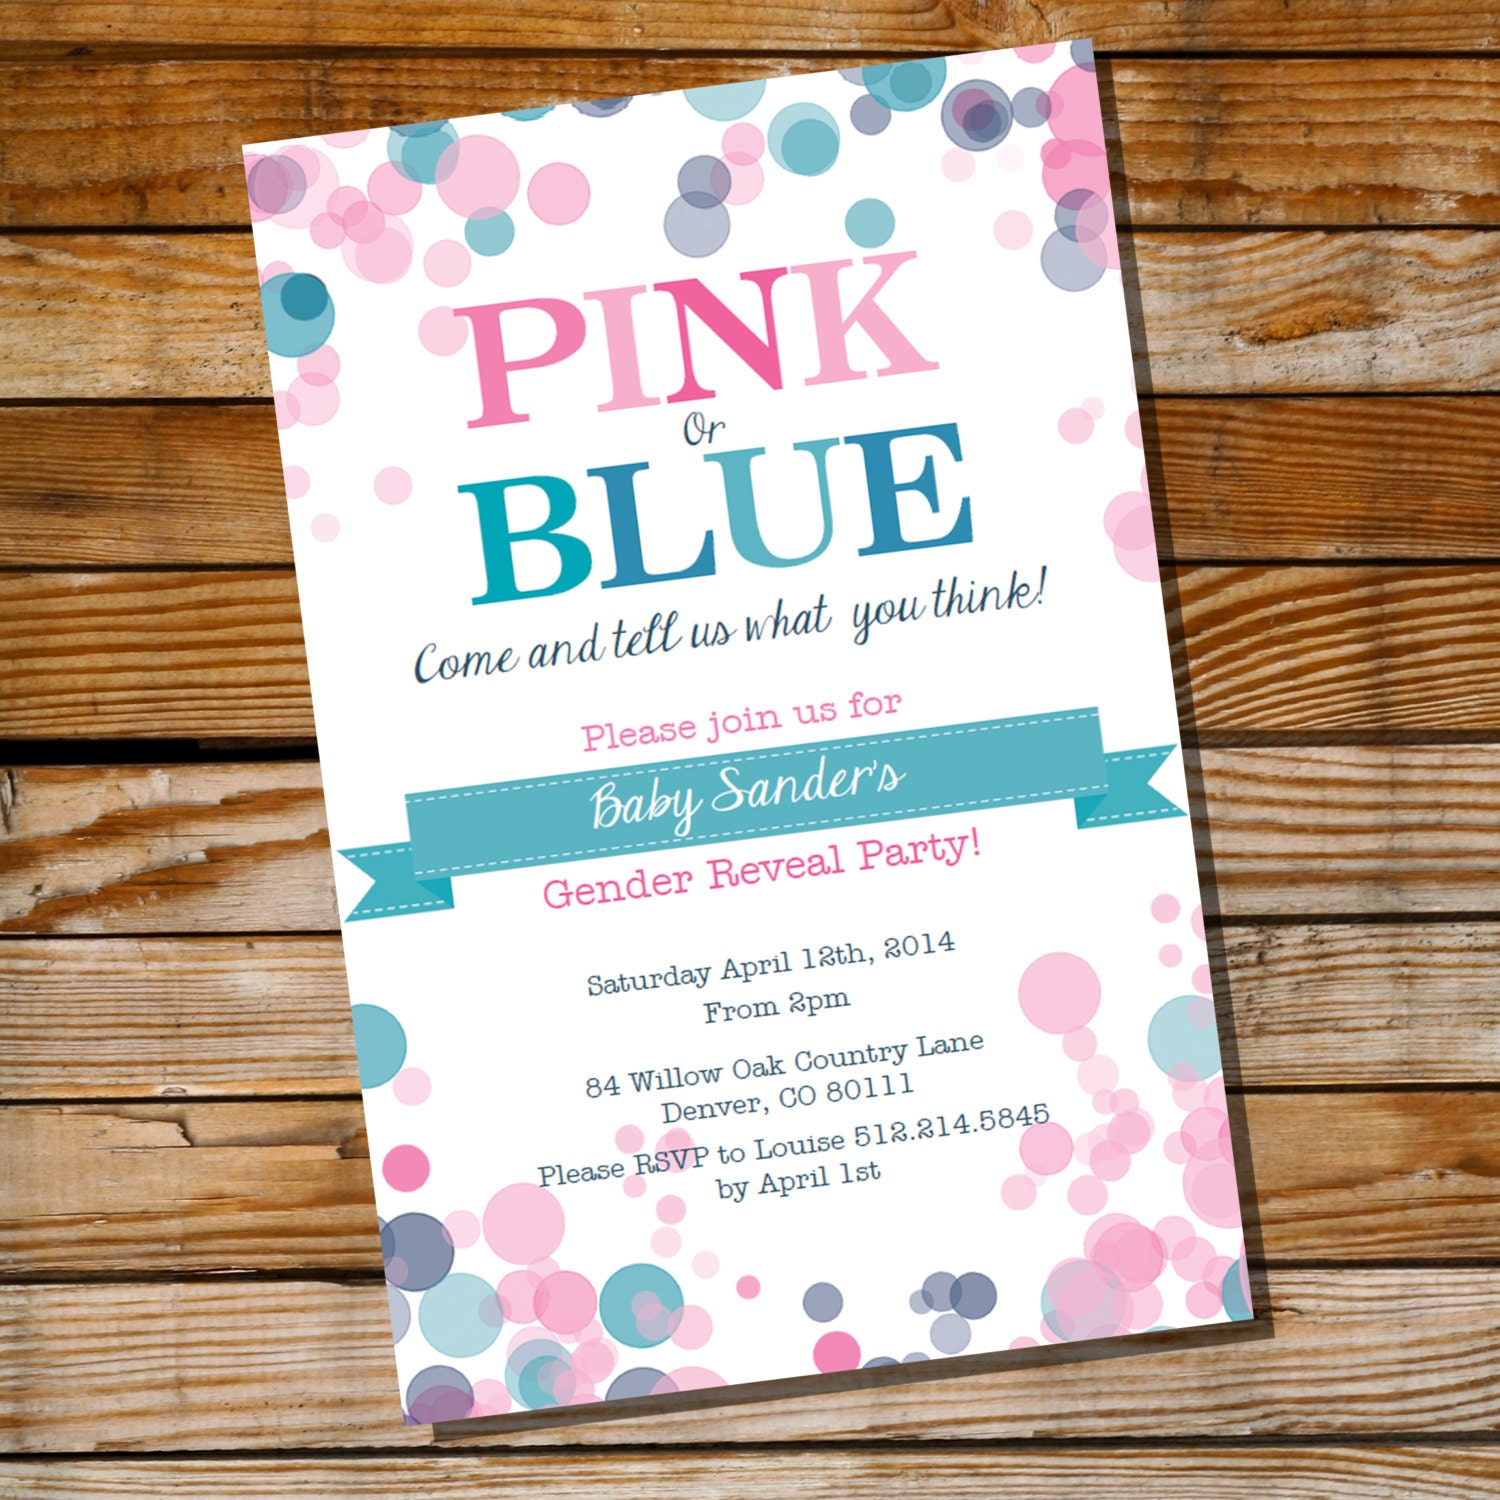 Gender Reveal Party Invitations 6